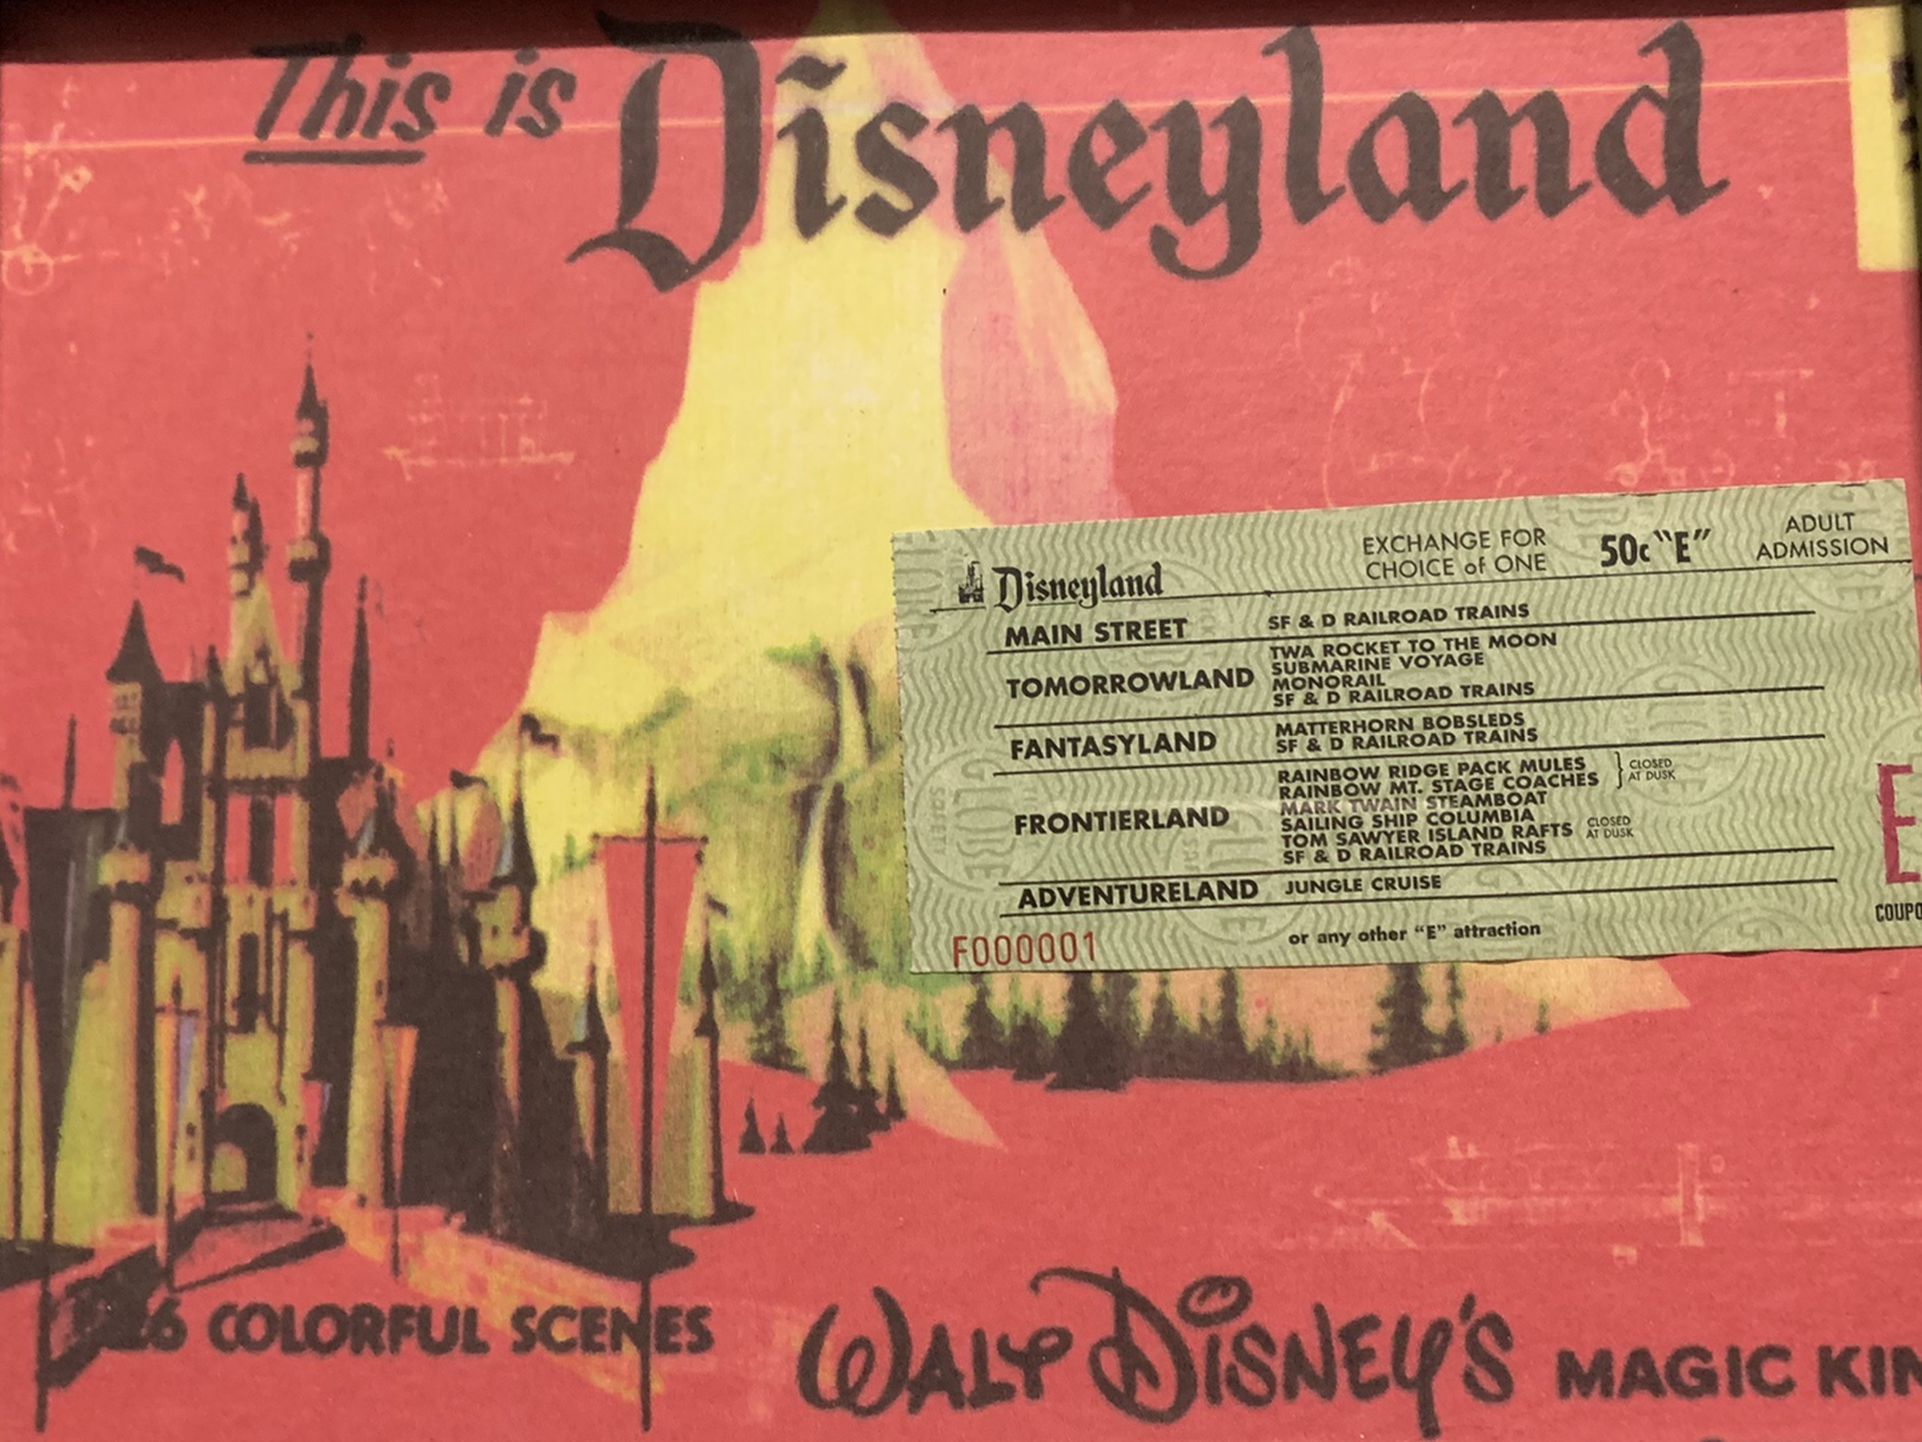 Disney Collection Of Books Also Original Ticket To Disneyland The Admission Was 50 Cents Extremely Collectible